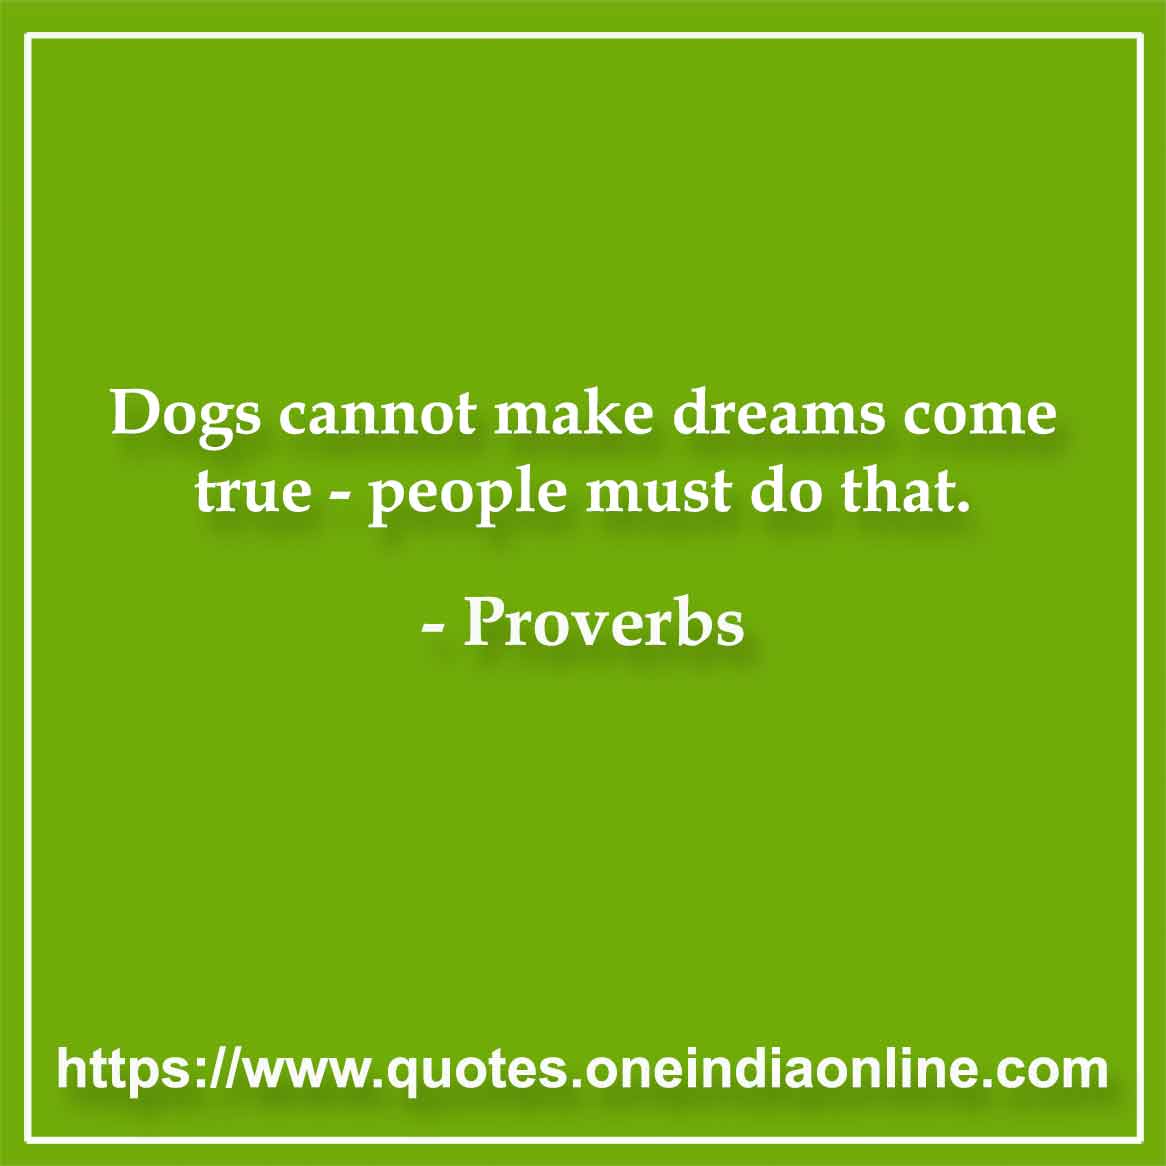 Dogs cannot make dreams come true - people must do that.